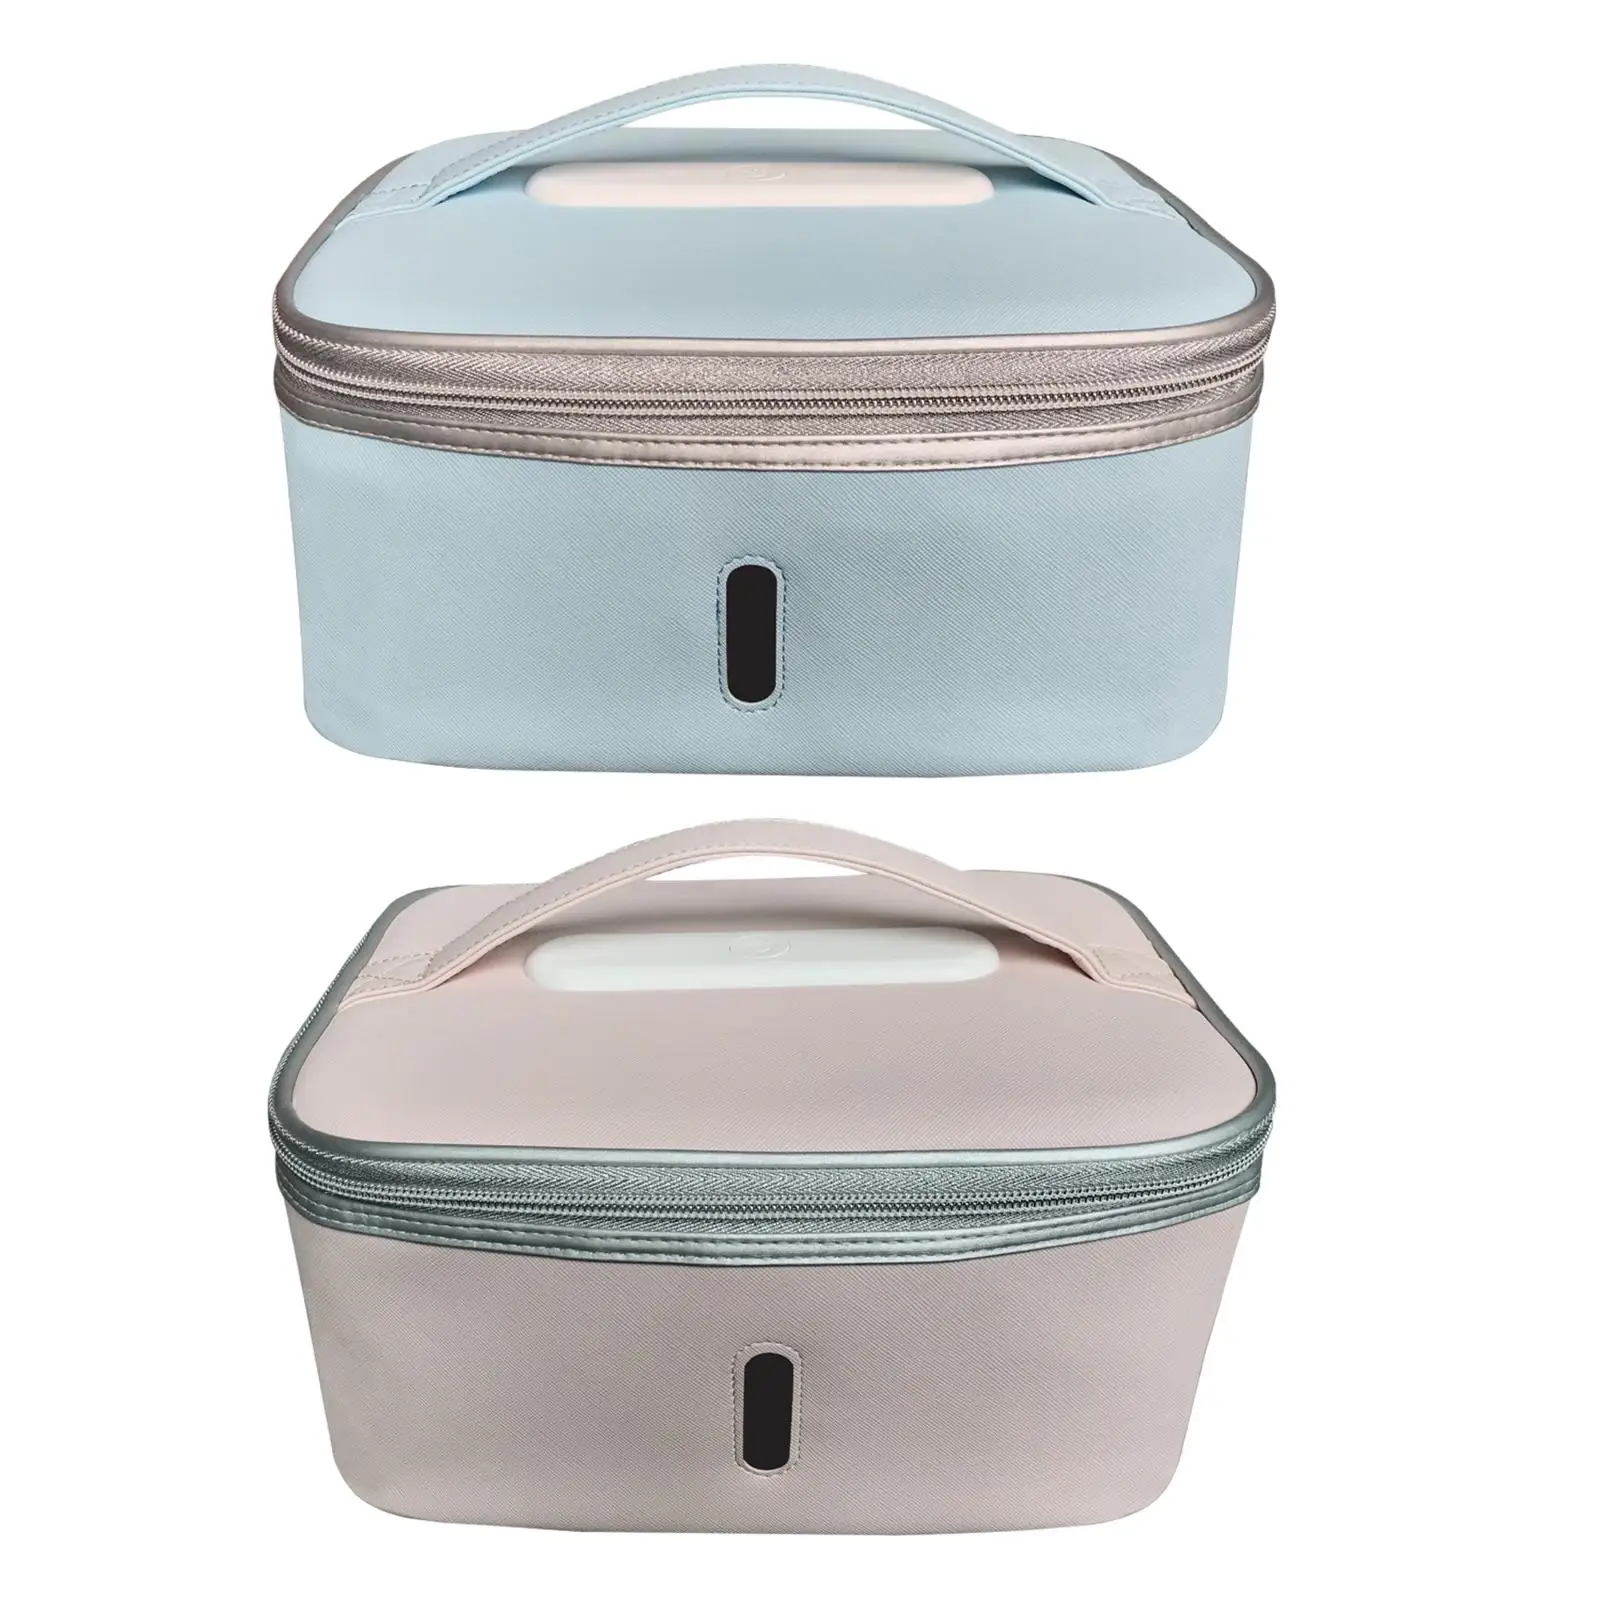 UV Light Sanitizer Bag Cosmetic Bag Portable Sterilizer Bag for Jewelry Towels Salon Barber Nail Tools Water Bottles Beauty Tool